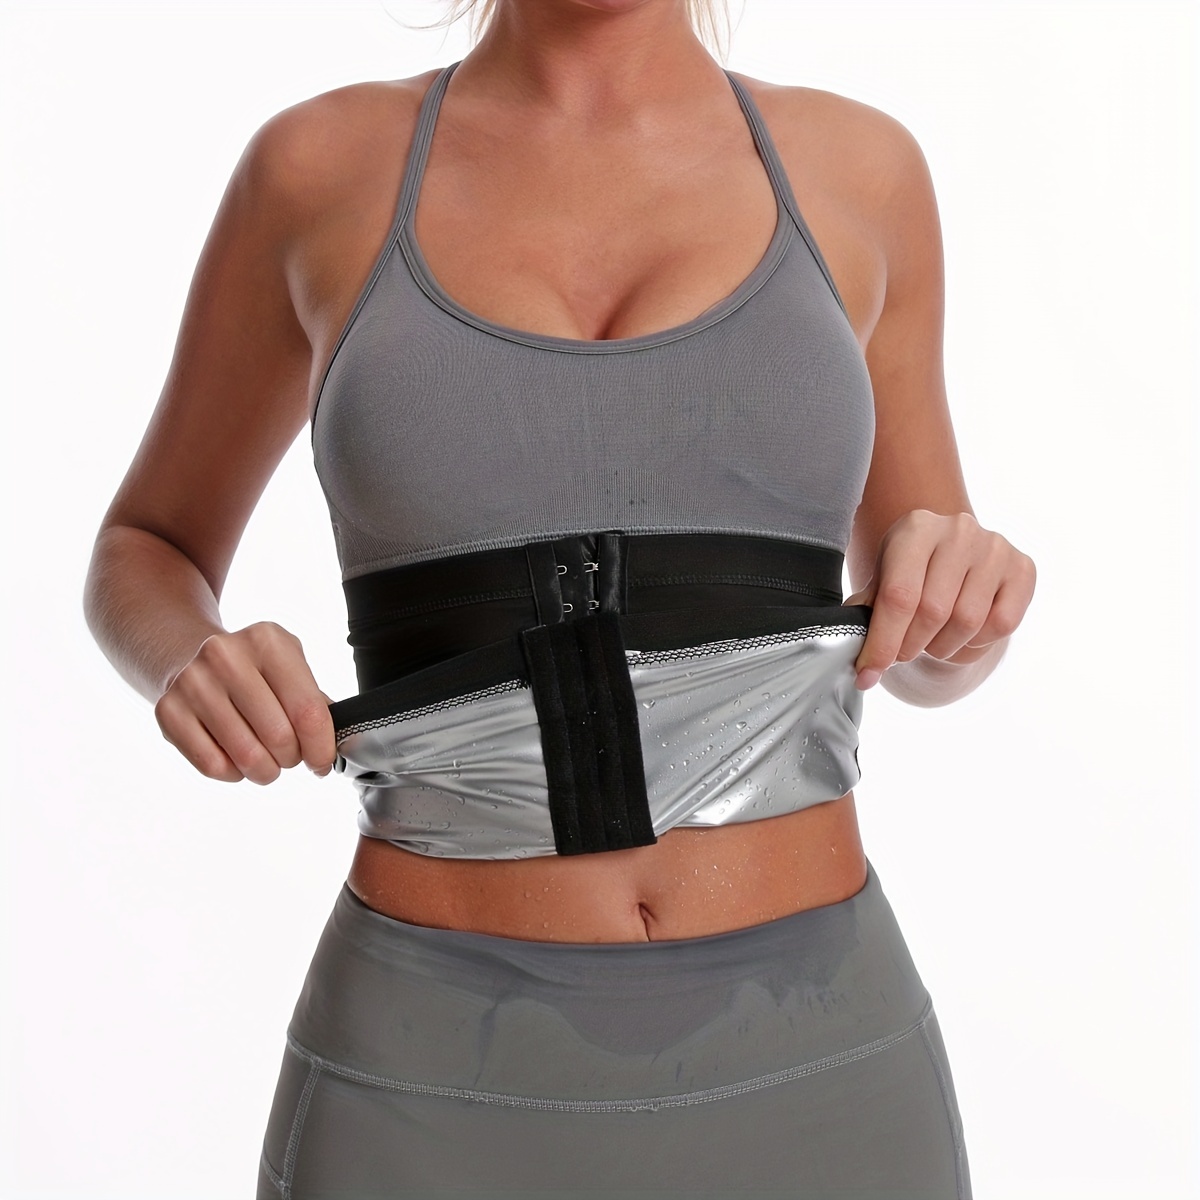 Shape Your Hourglass Figure with Our 3-Segmented Corset Waist Trainer -  Perfect for Women's Workouts, Postpartum Recovery & Back Support!